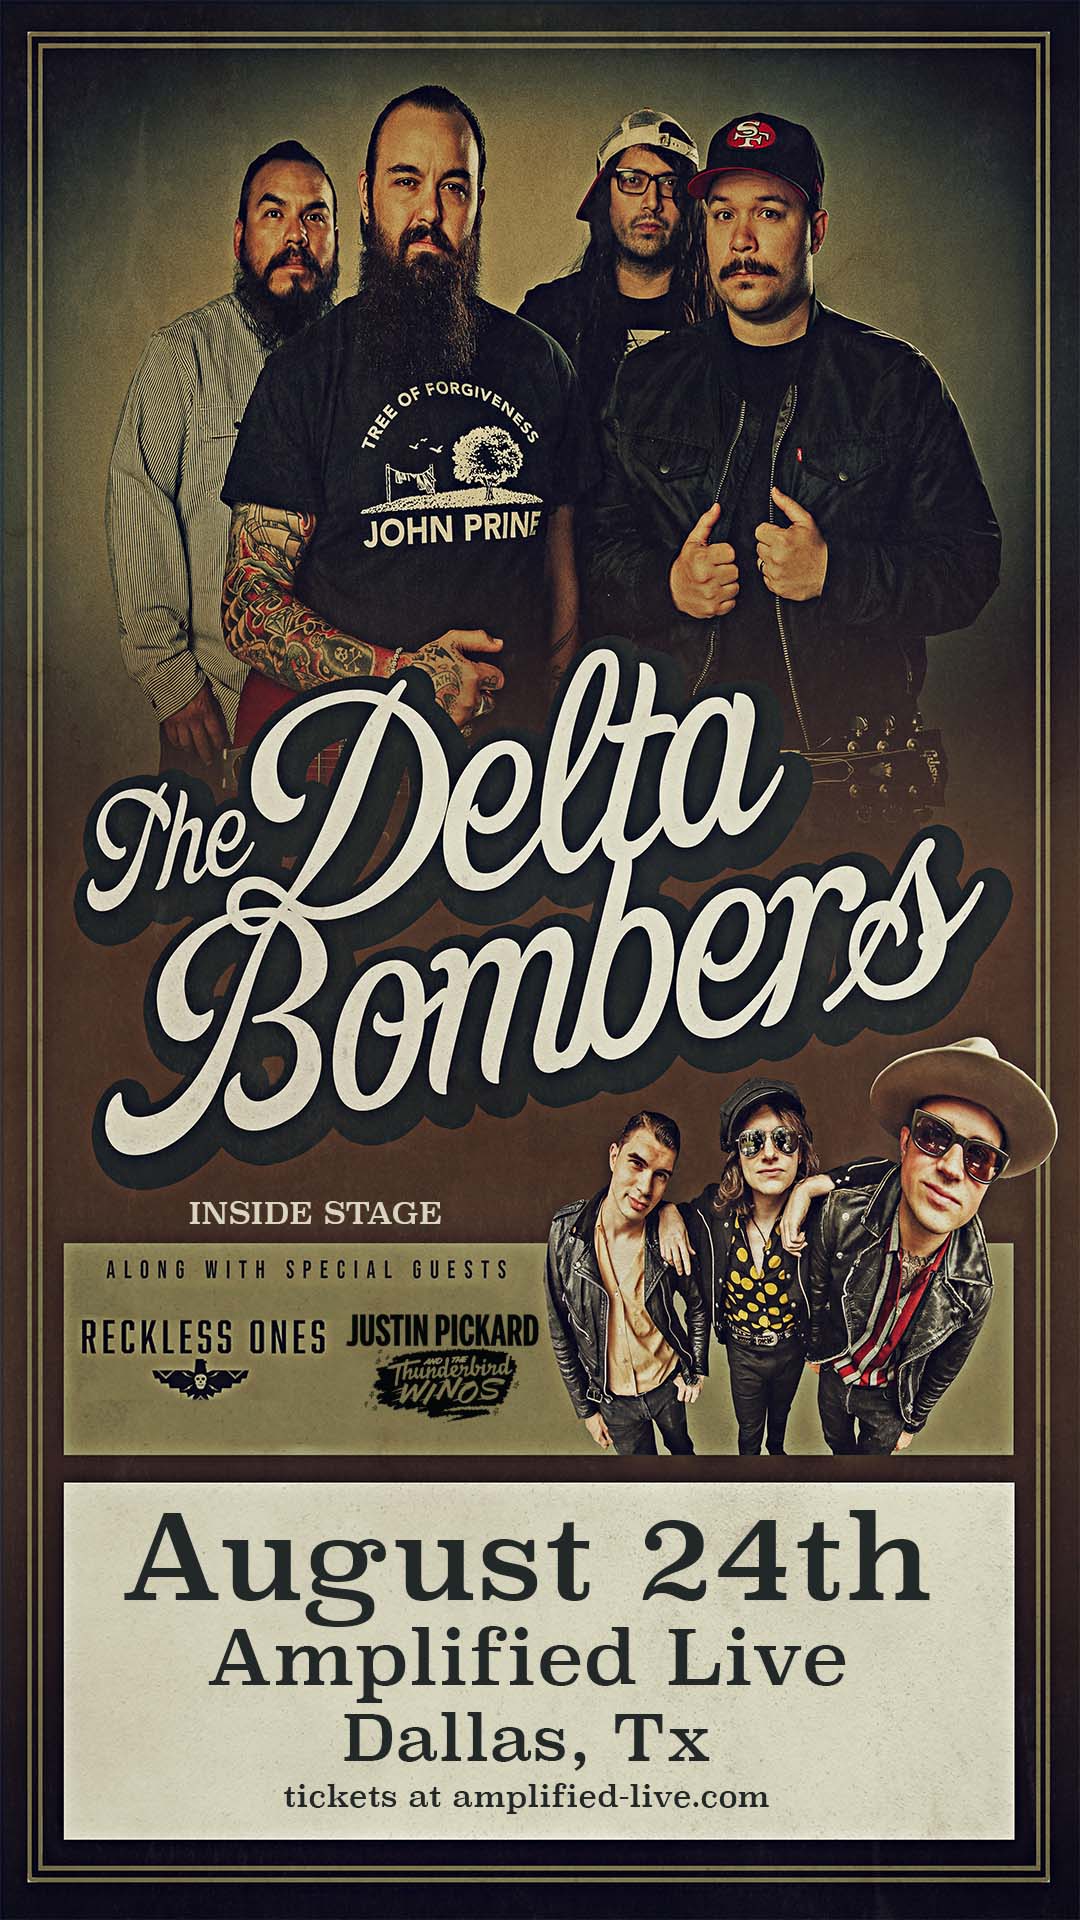 Buy Tickets to The Delta Bombers INSIDE STAGE in Dallas on Aug 24, 2022